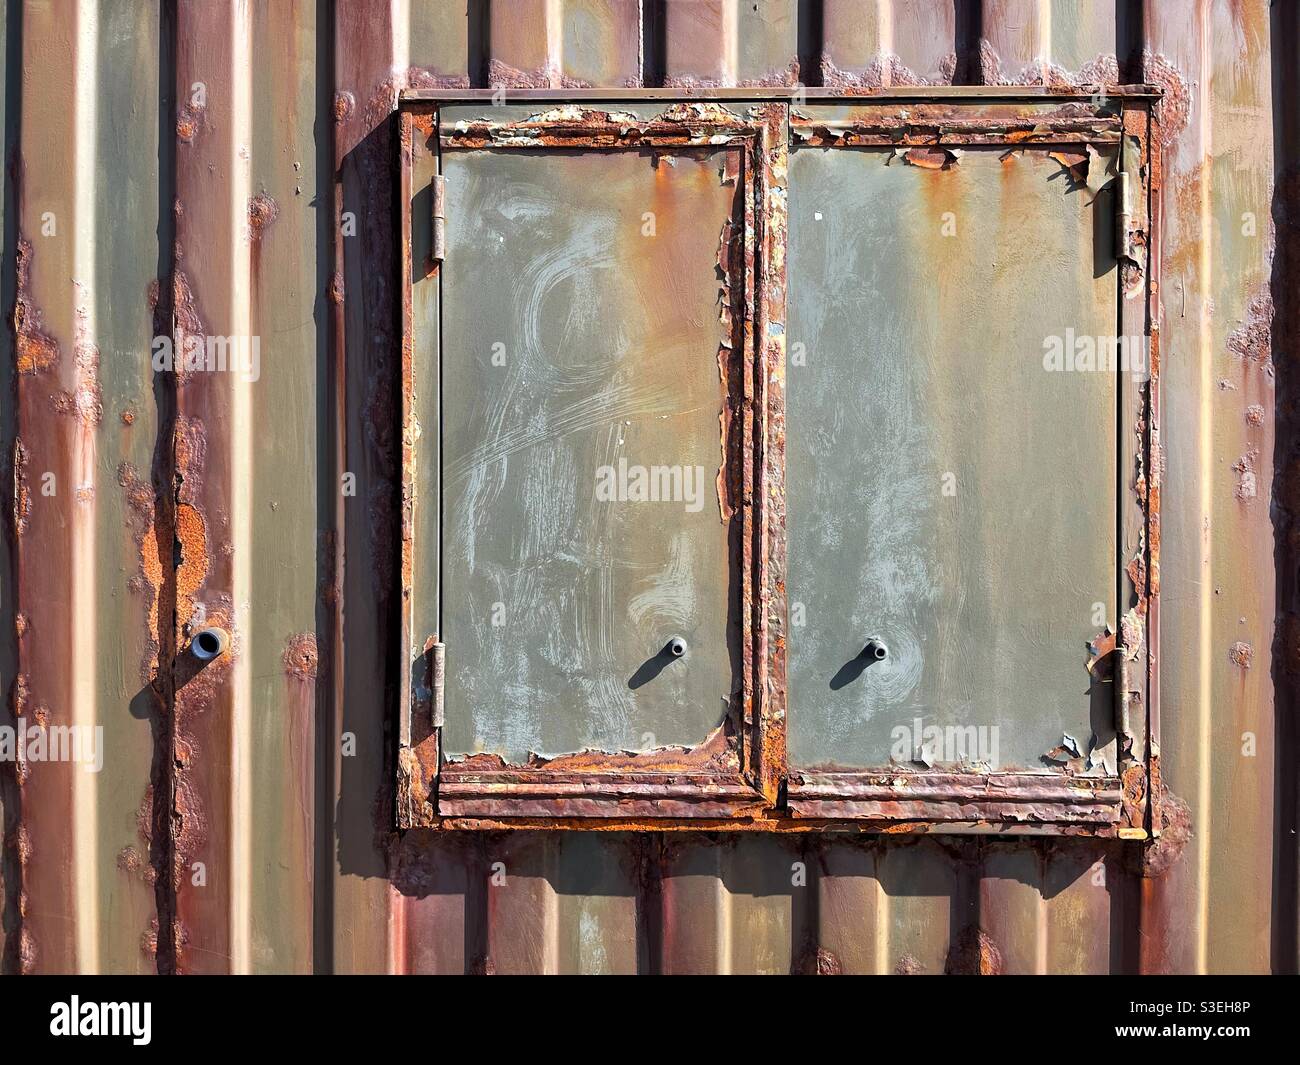 Rusty window shutter on an old shipping container Stock Photo